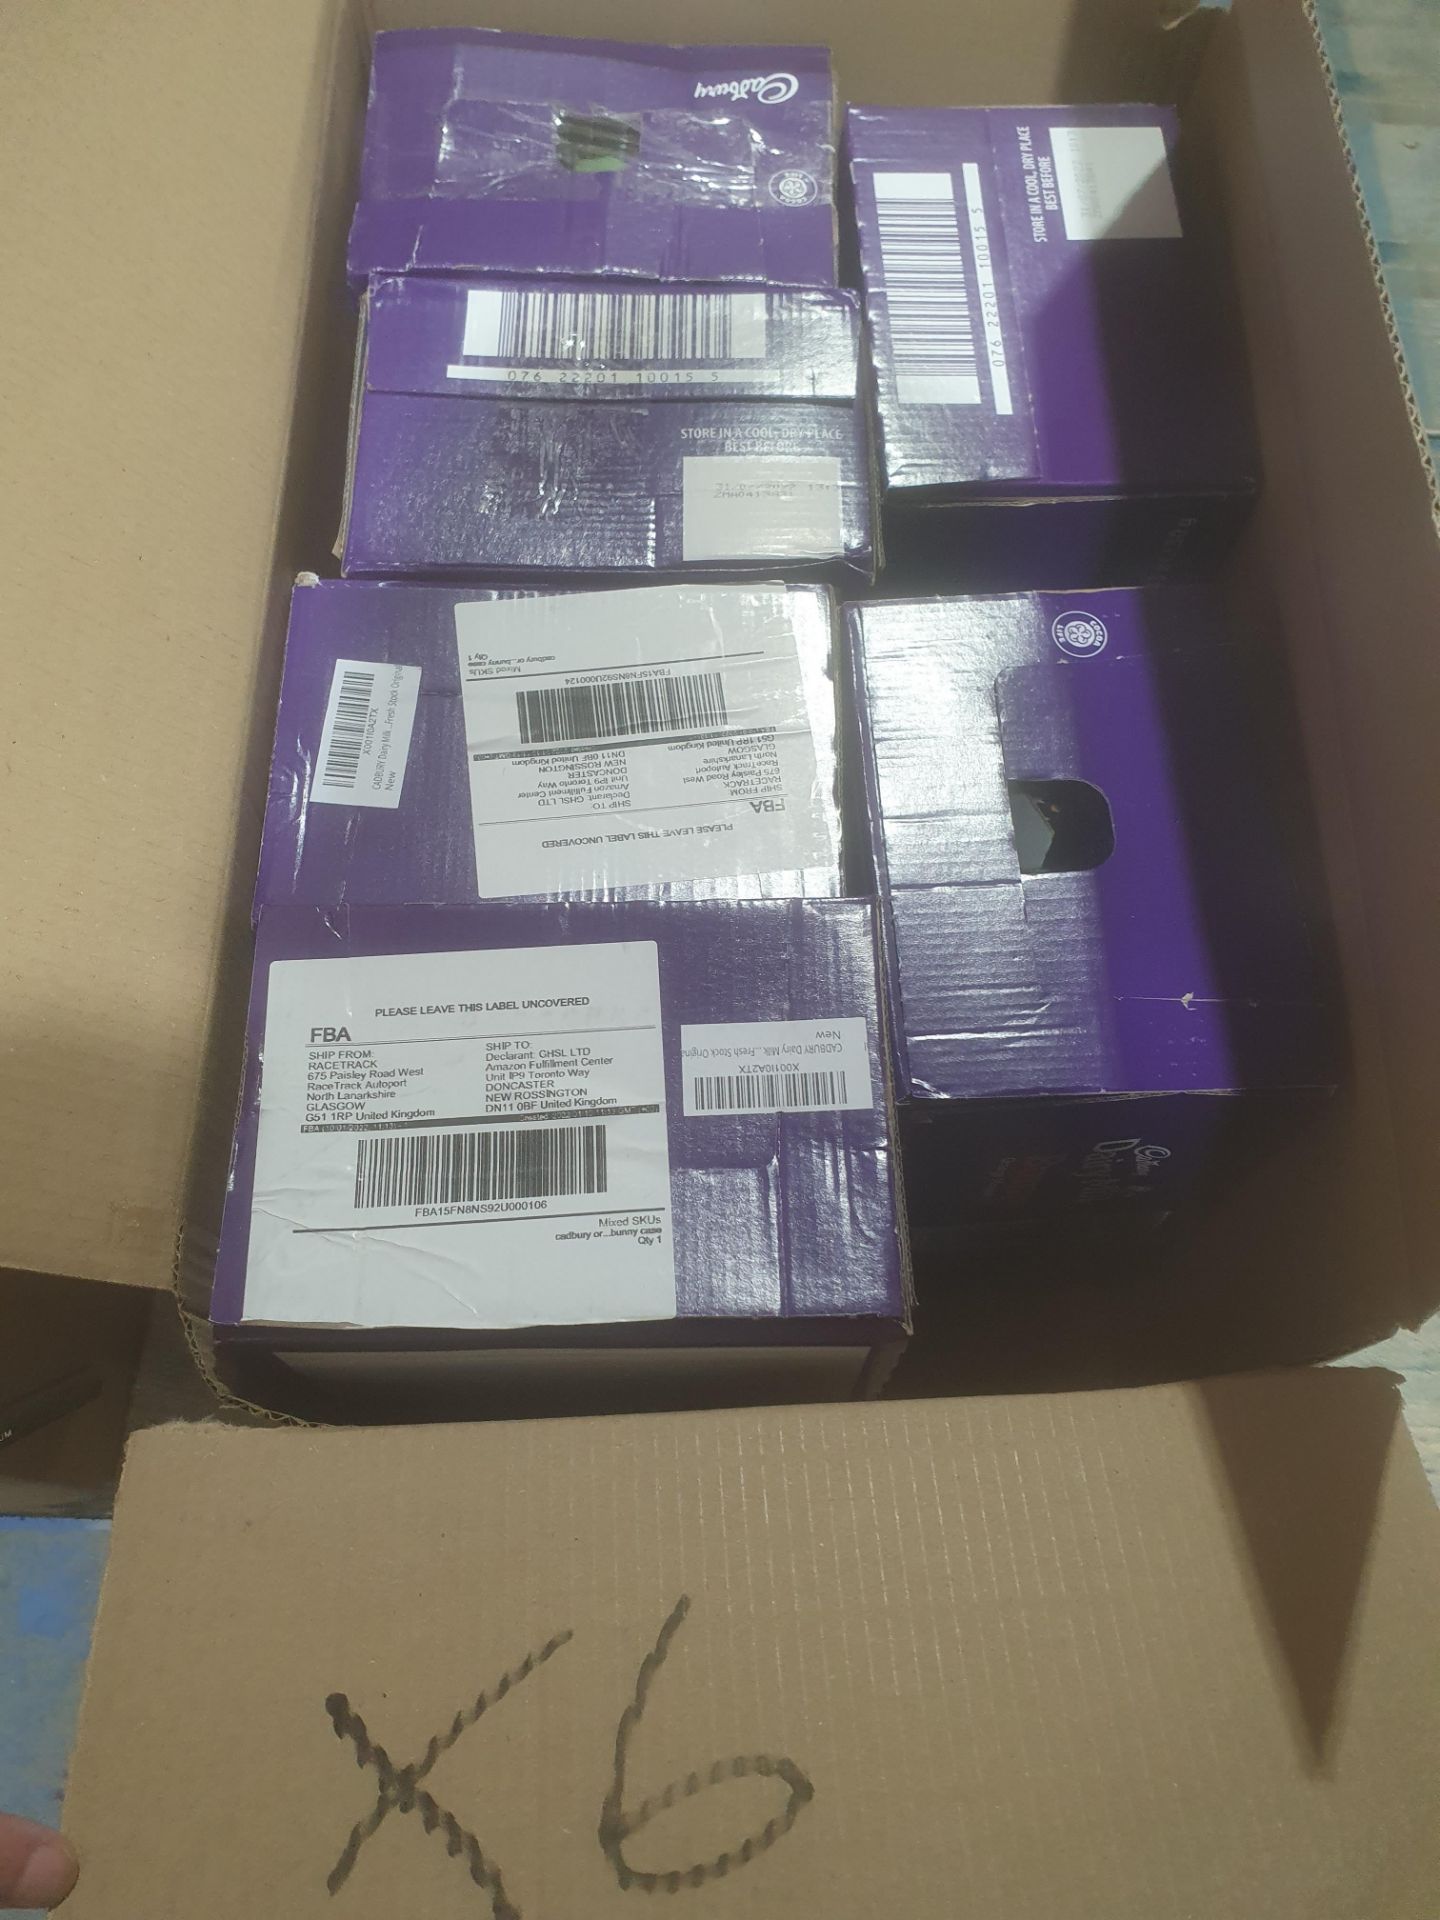 X 6 BOXES OF 40 DAIRY MILK BUNNIES ORANGE MOUSE 240 BARS IN TOTAL Condition ReportAppraisal